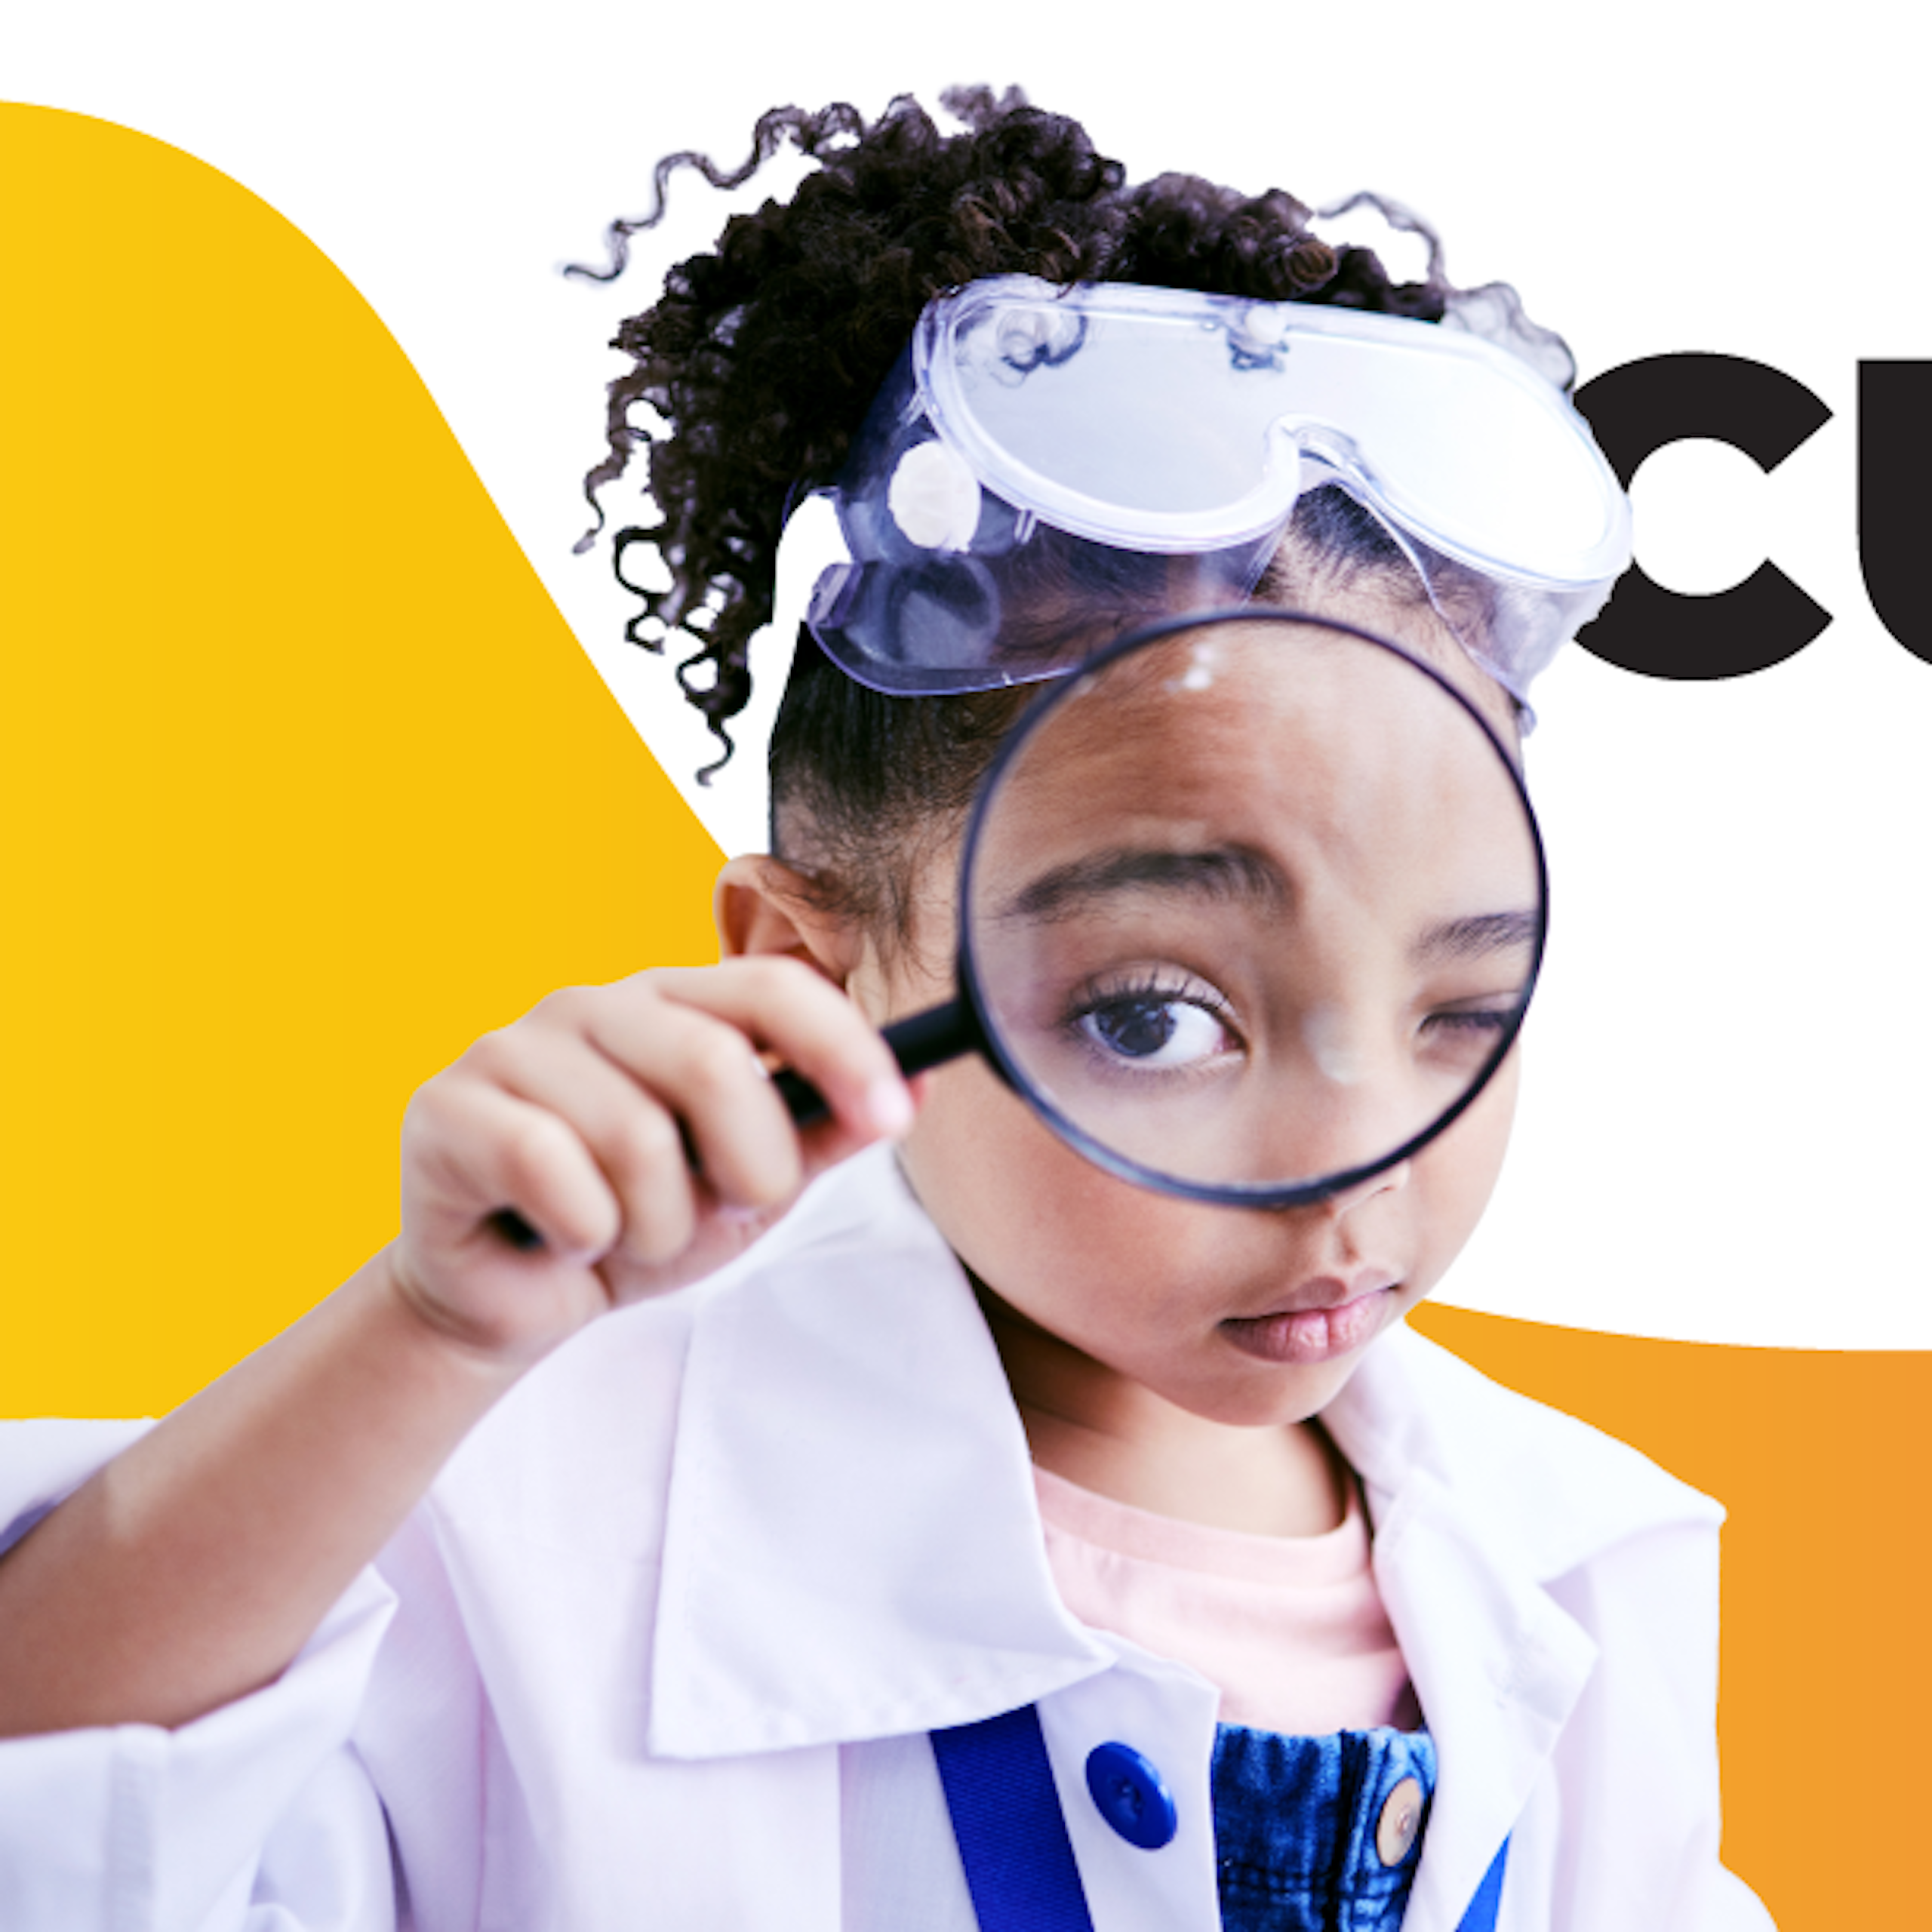 The Conversation’s Curious Kids – new podcast where kids get answers direct from experts